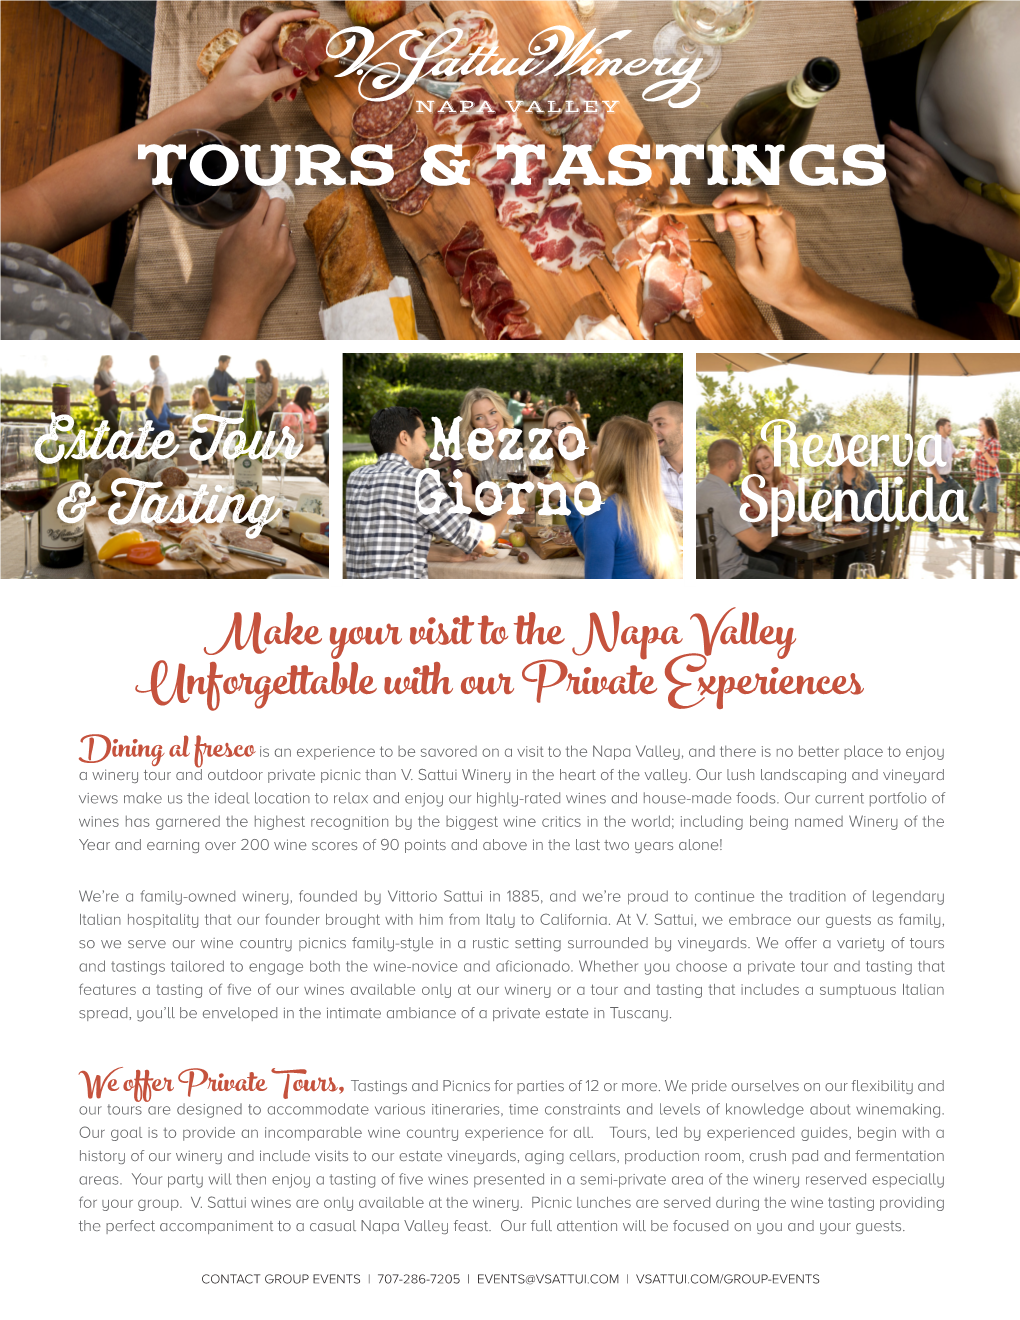 Make Your Visit to the Napa Valley Unforgettable with Our Private Experiences